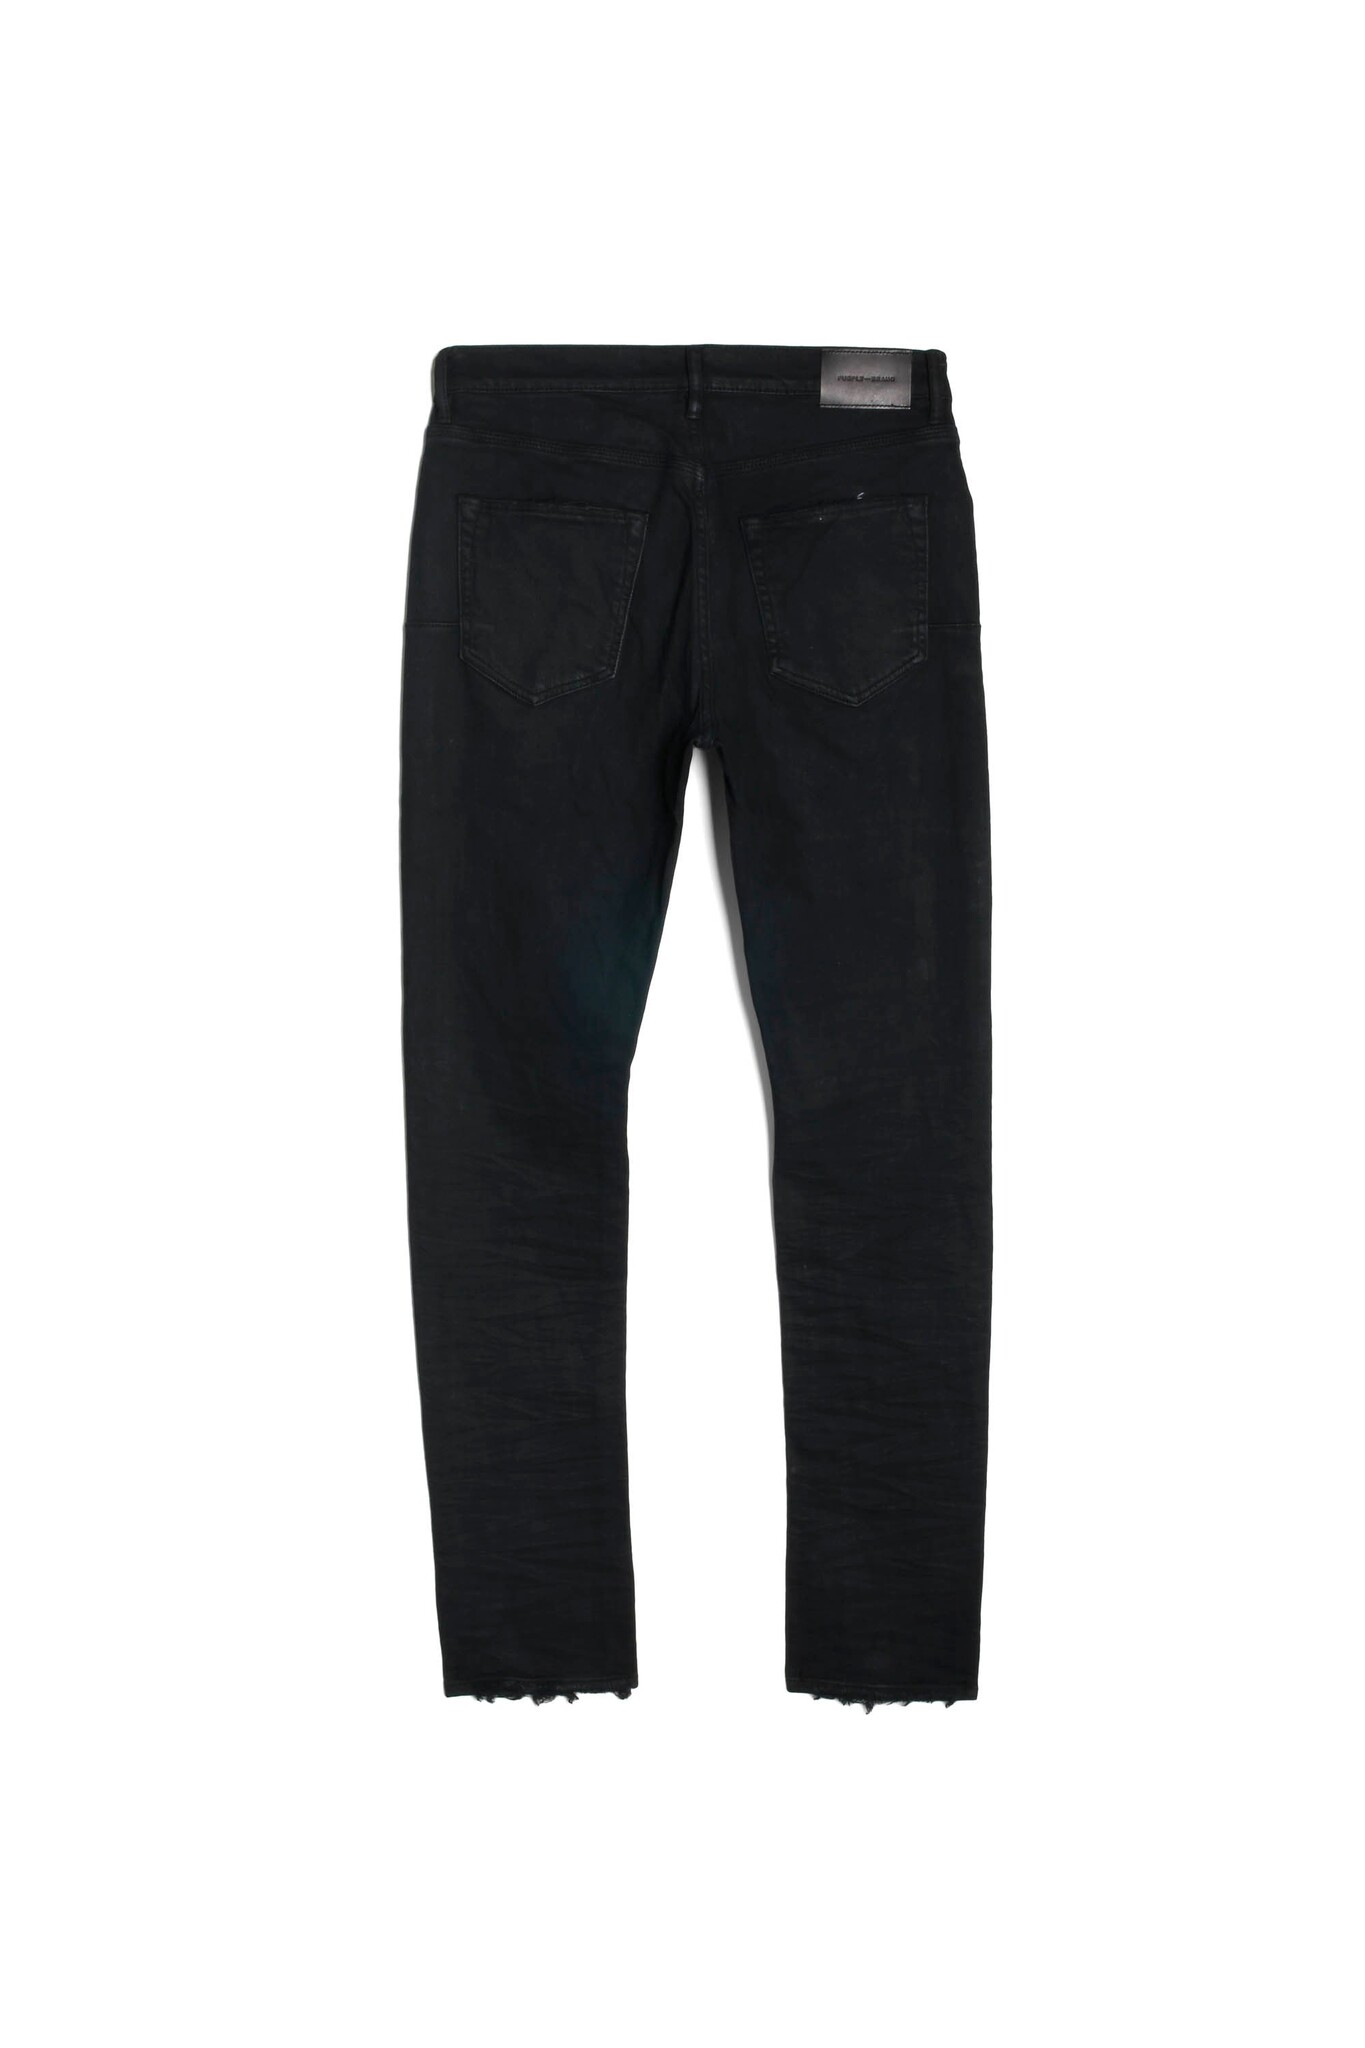 LOW RISE SKINNY JEAN BLACK RESIN 3/D P001-BLR - The One